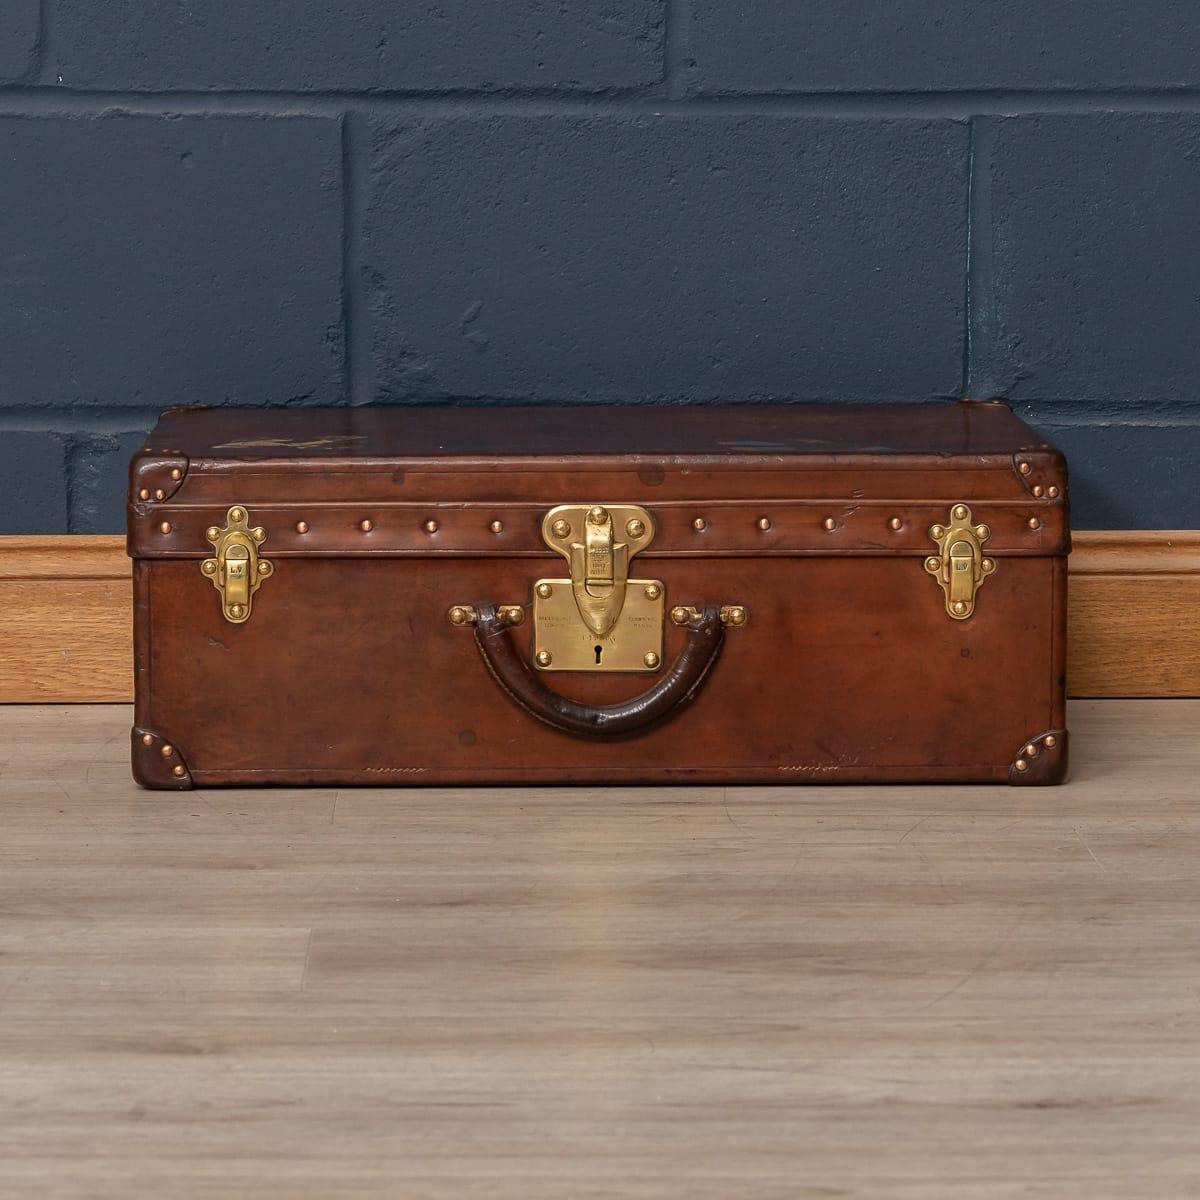 A very rare Louis Vuitton suitcase dating from the early part of the 20th century, covered not in the world famous (but more common) monogram canvas but in a single piece of cow hide. These all-leather trunks and cases were made by special order and